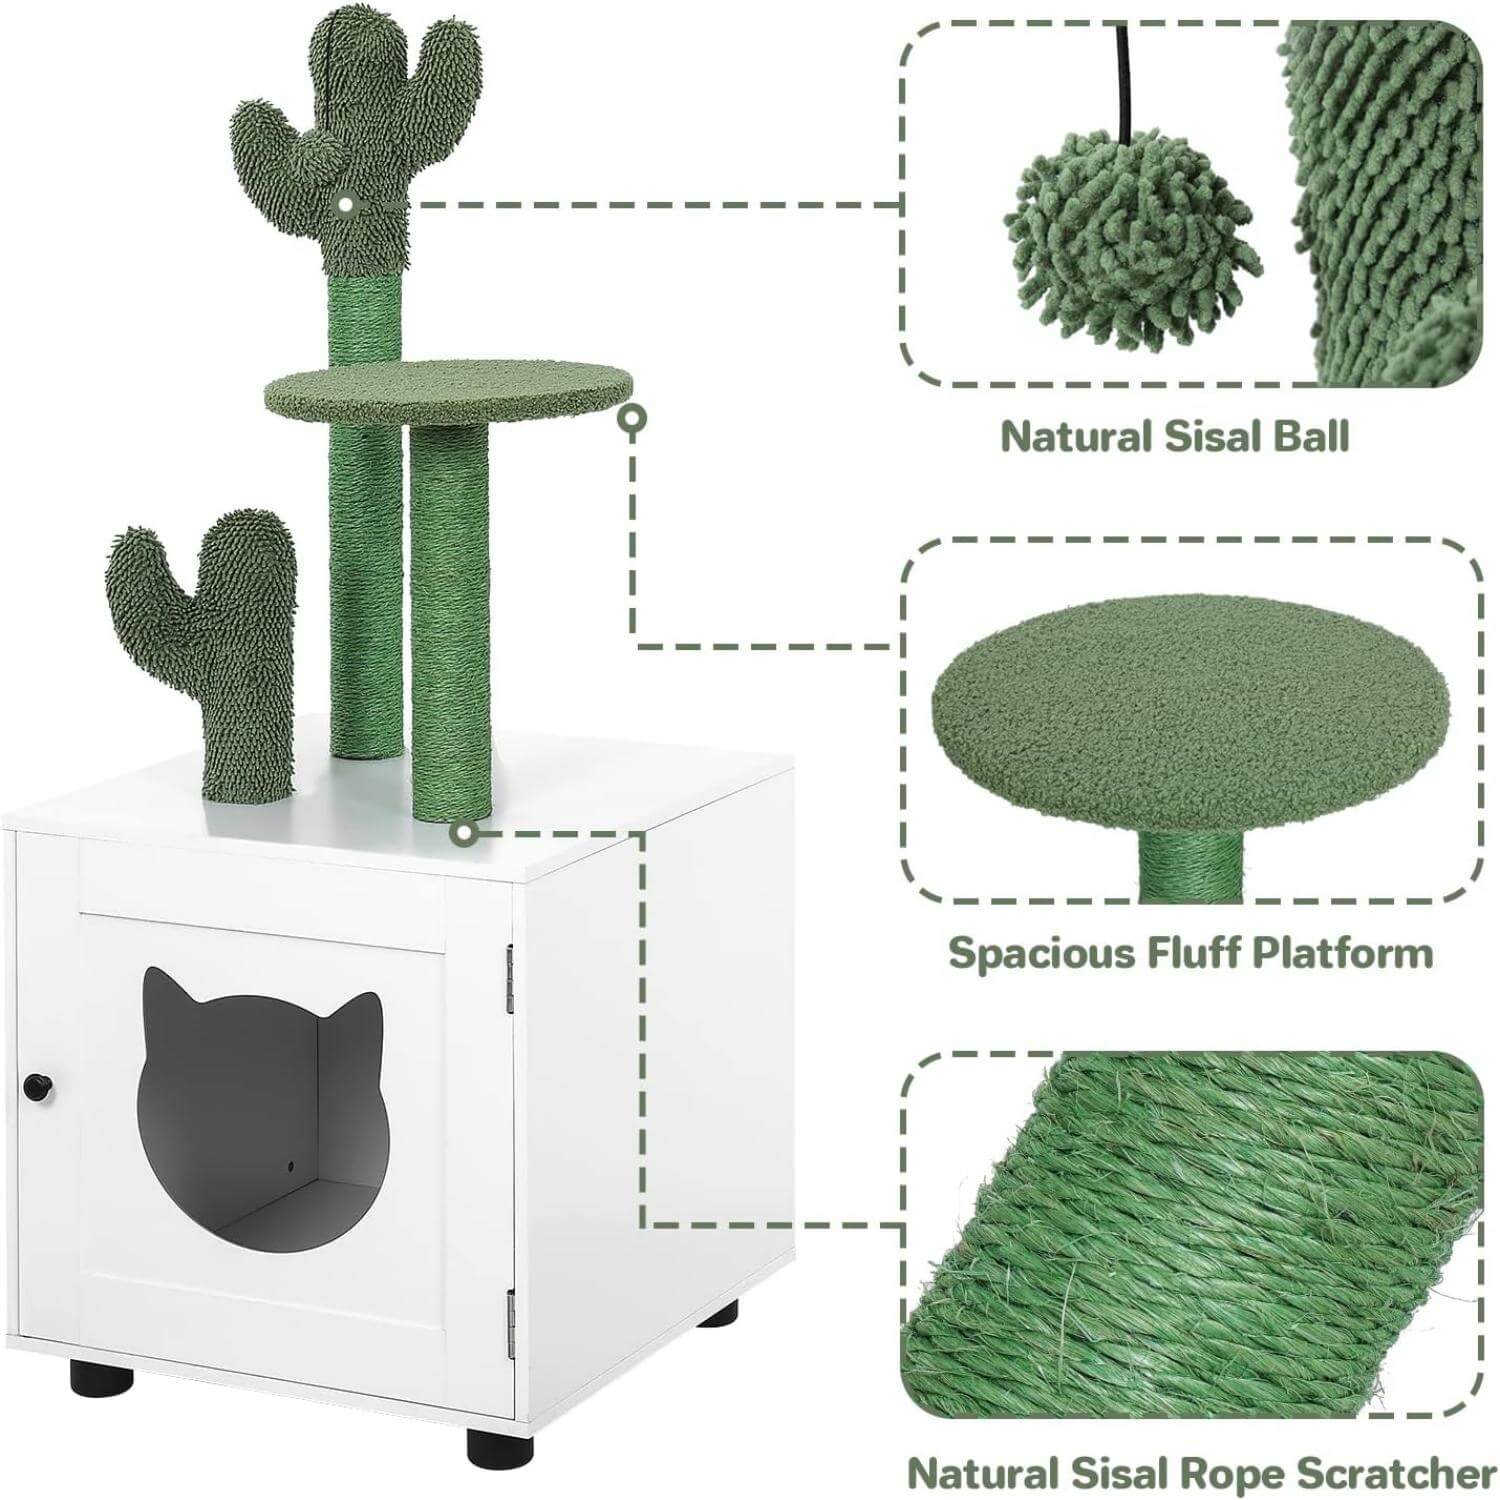 Litter Box Enclosure with Cactus Cat Tree Tower details